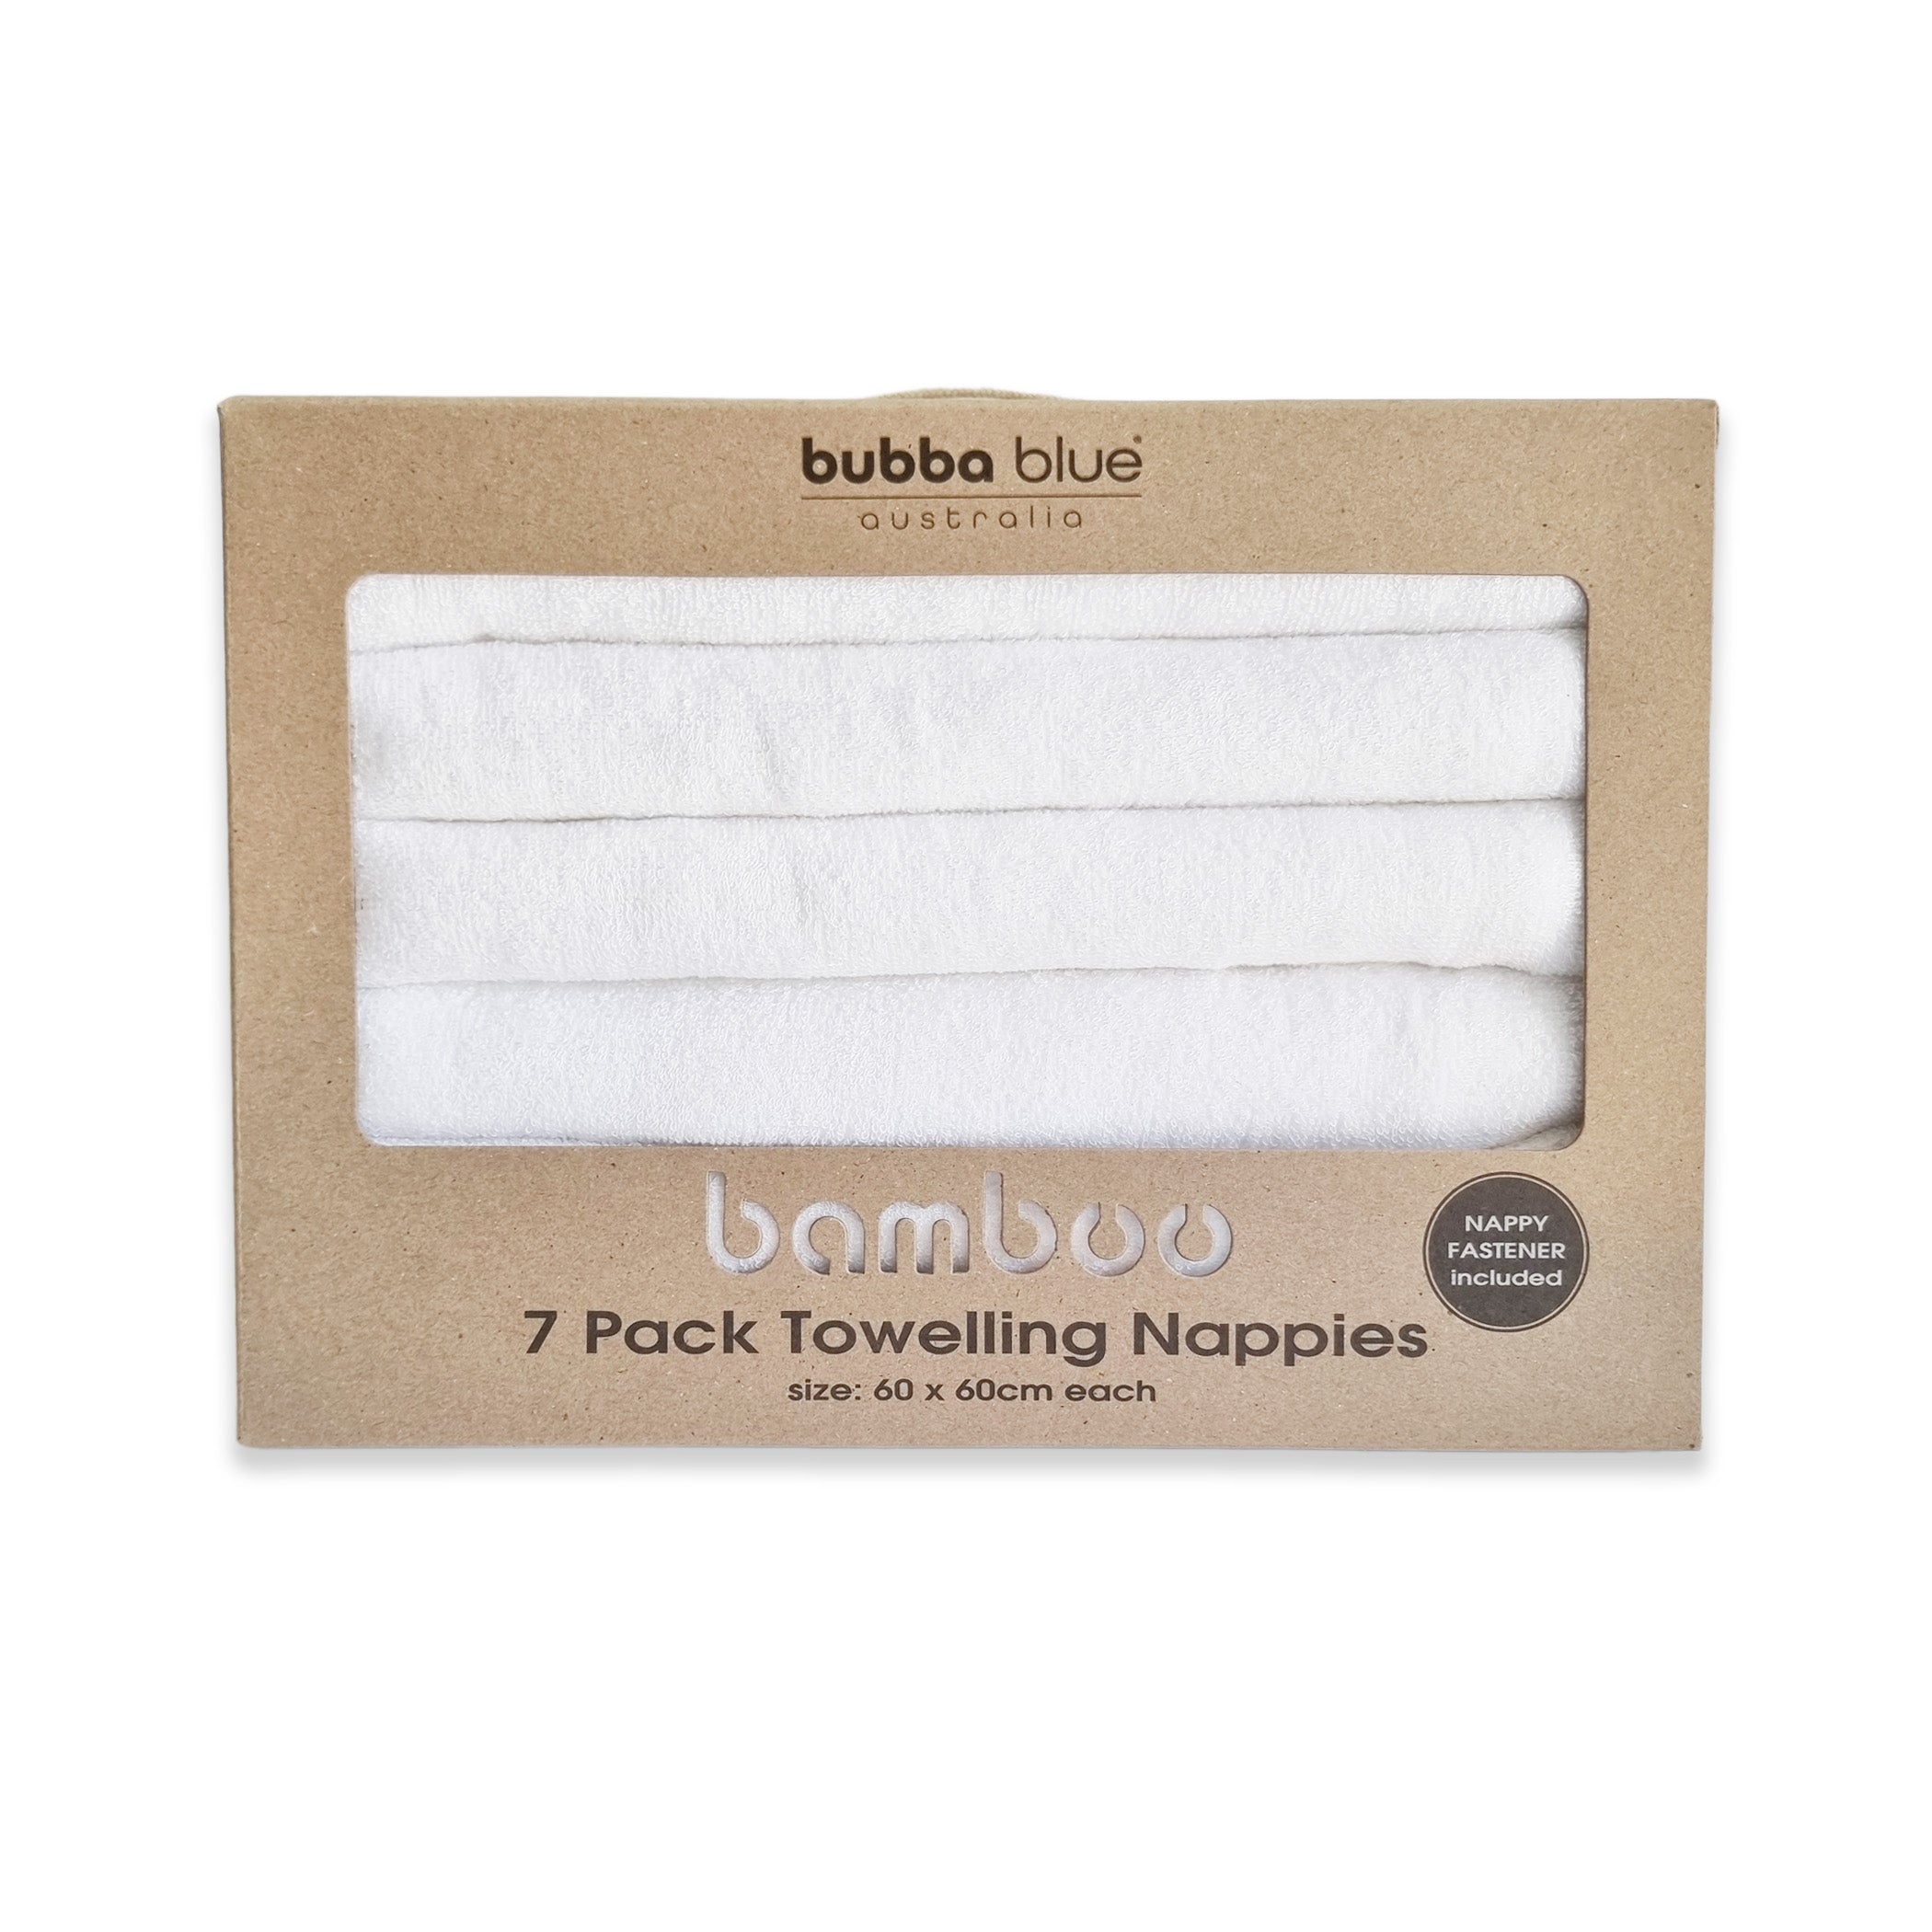 Bamboo White 7 pack Nappies / Towelling Squares